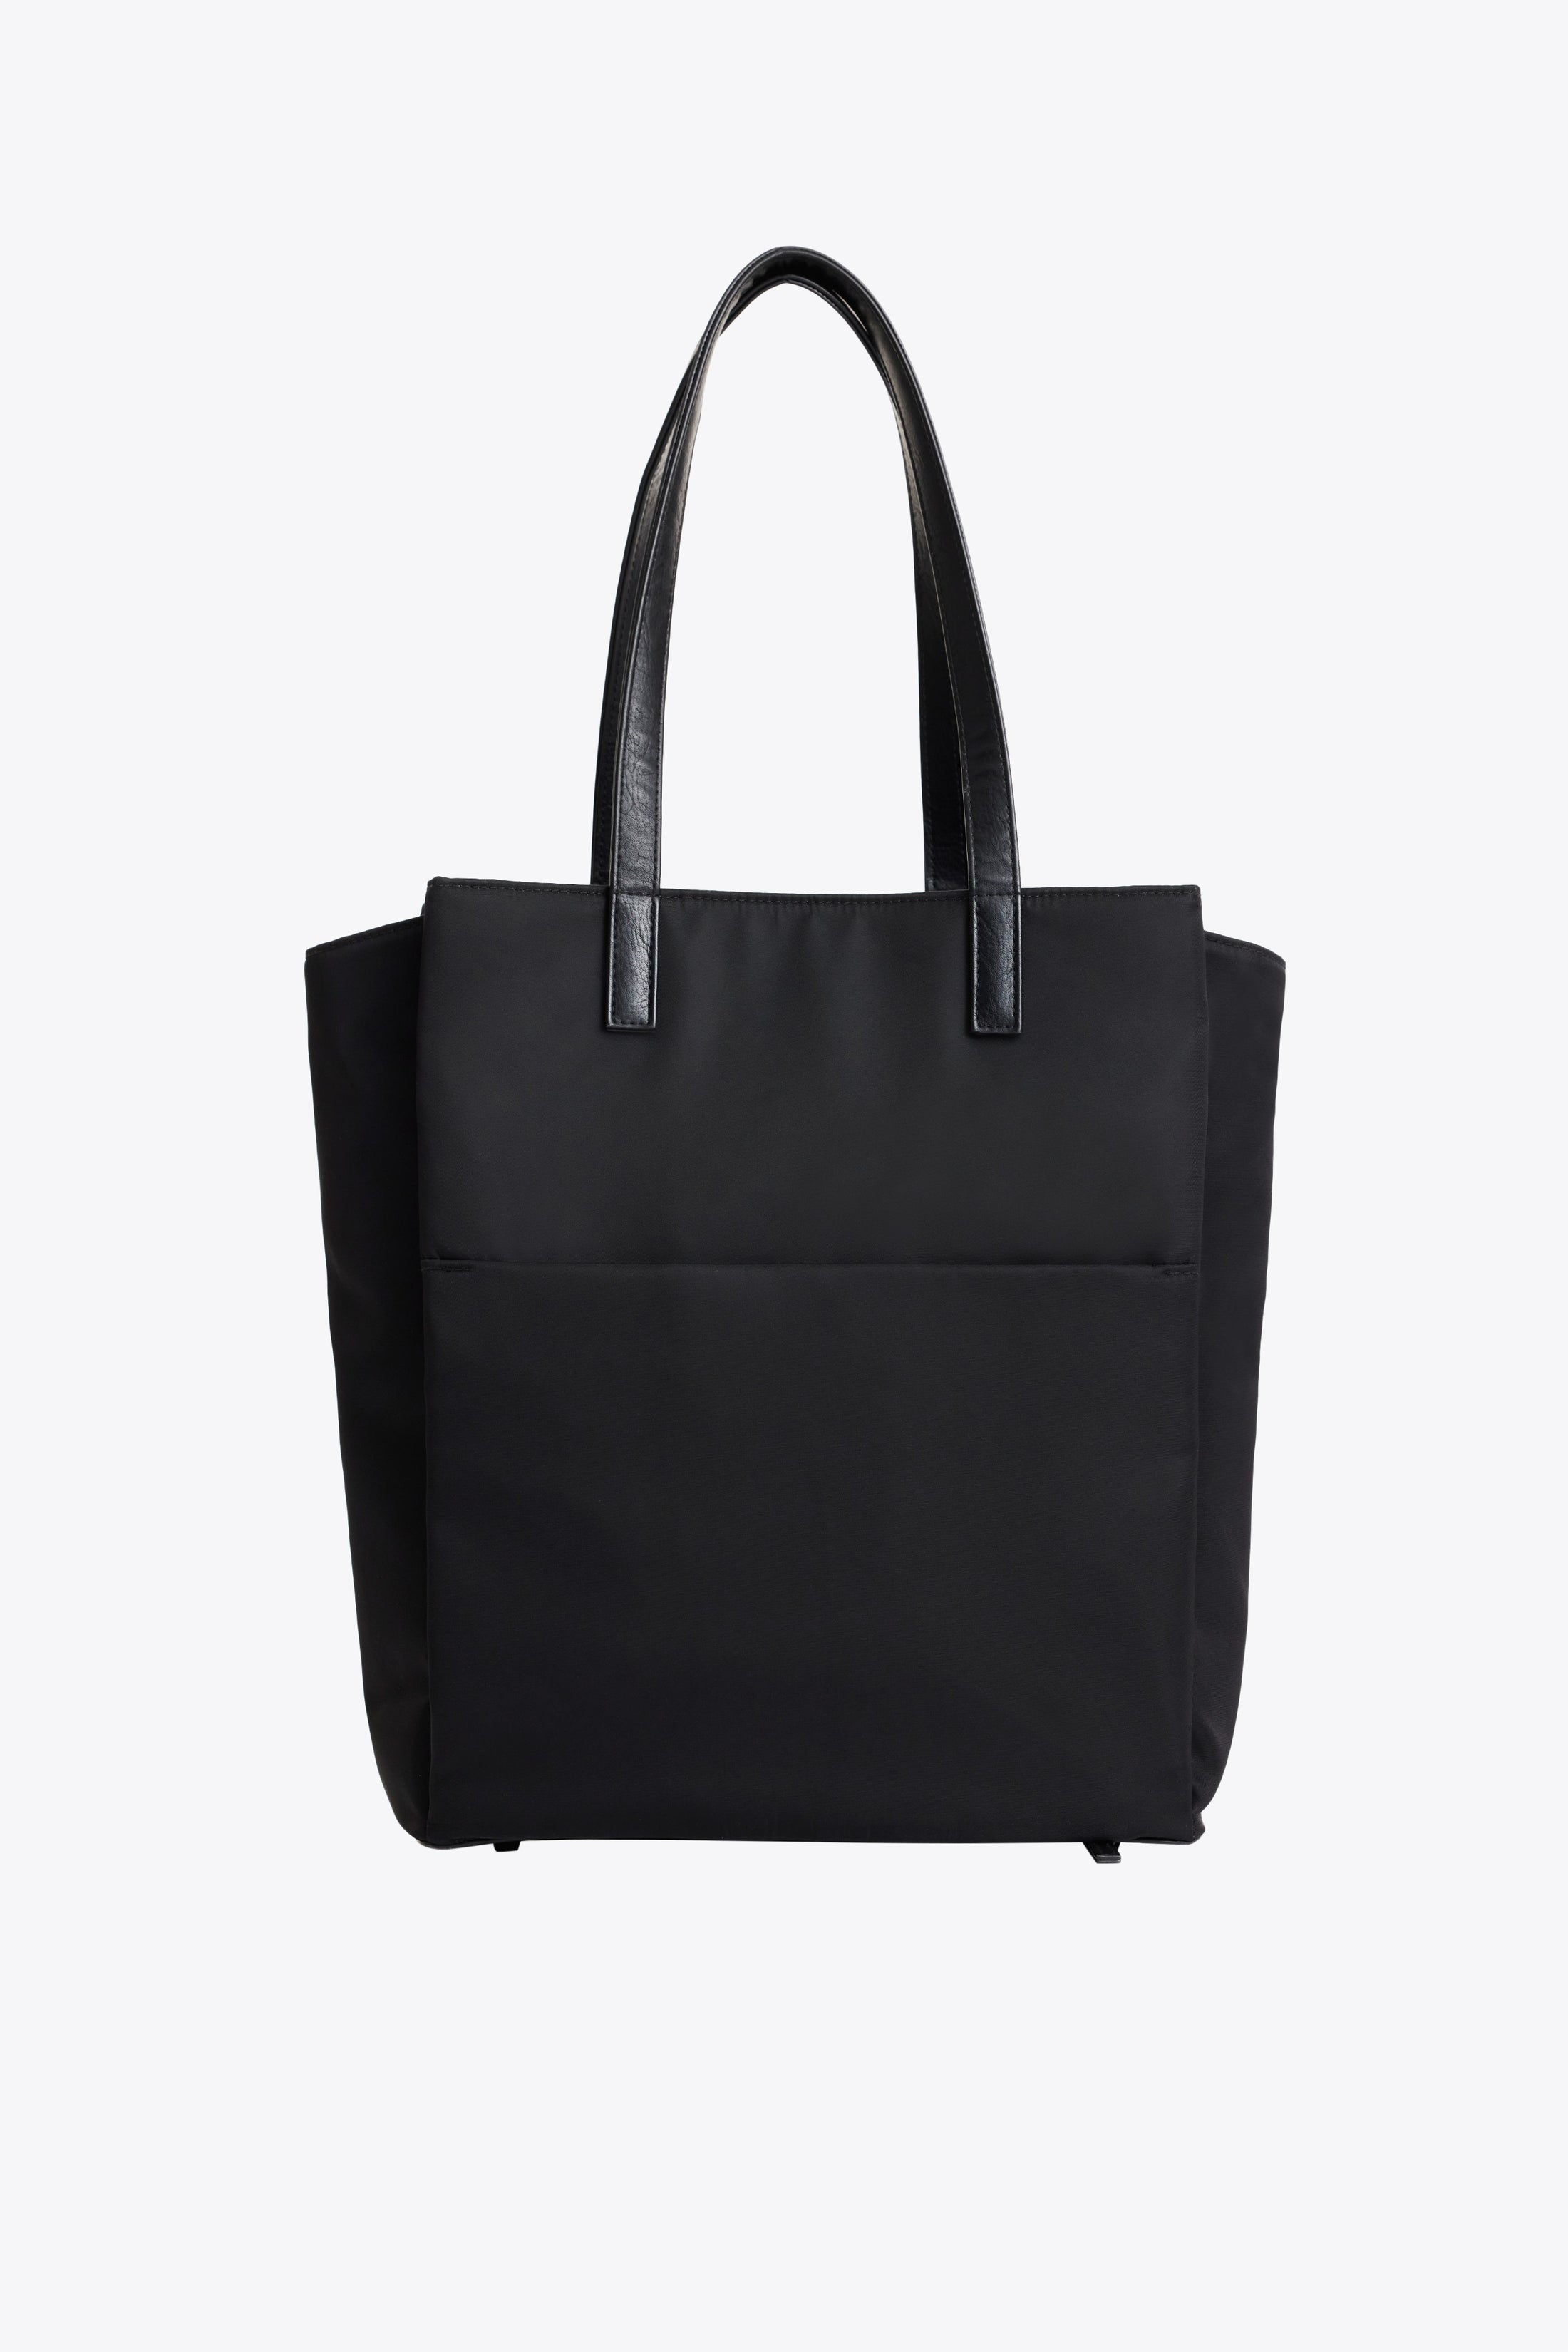 BÉIS 'The Commuter Tote' In Black - Black Commuter Tote For Work & Travel